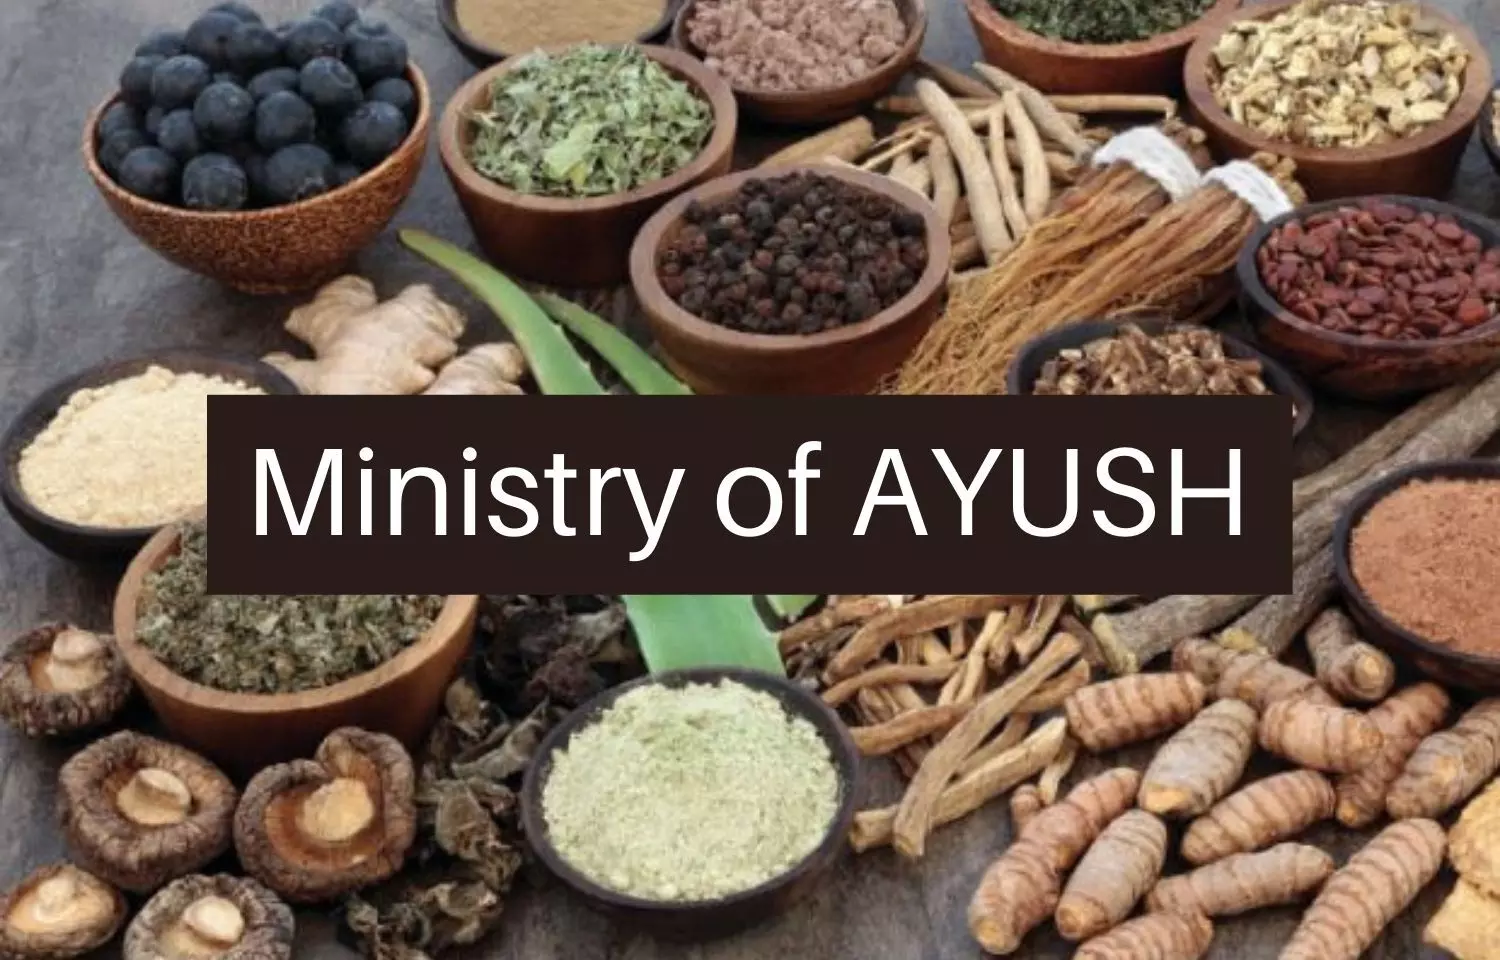 Ayush Ministry issues guidelines on holistic health for COVID